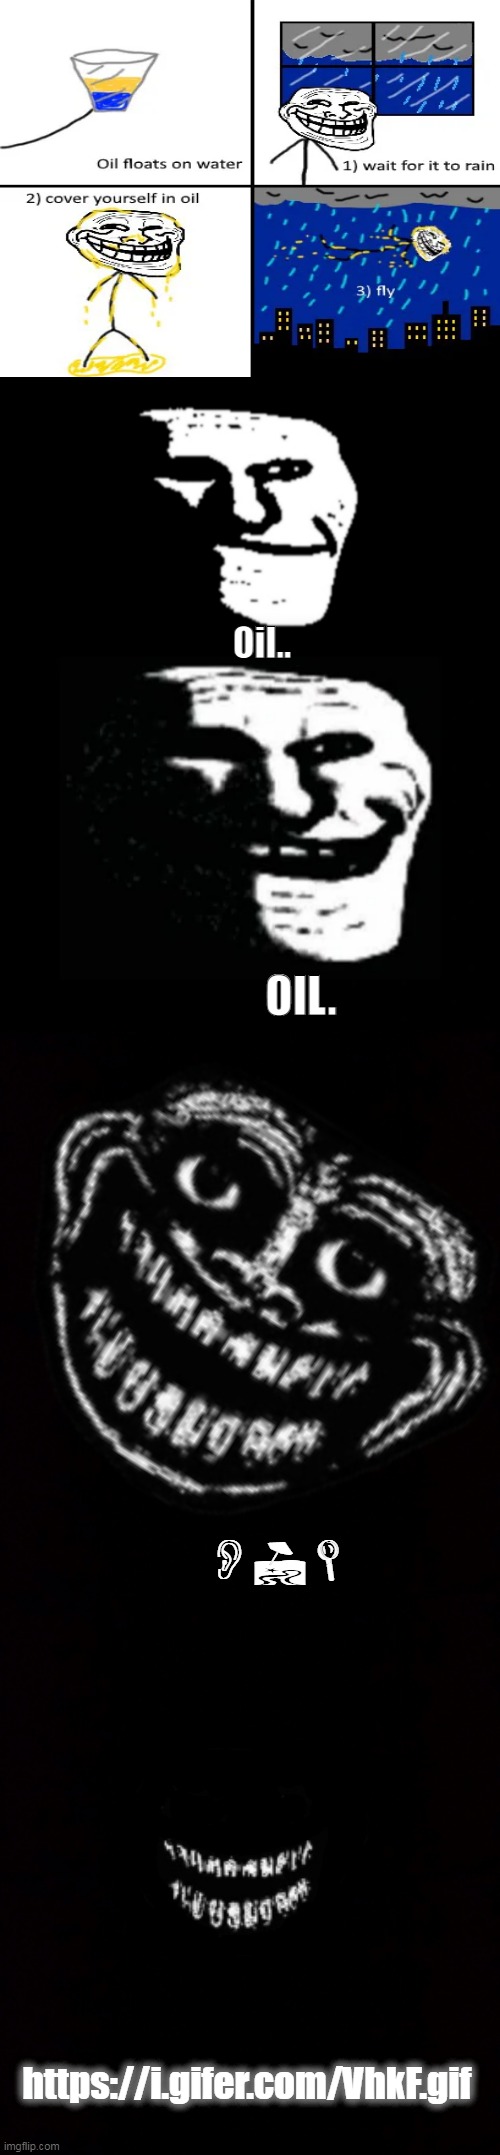 OIL. | Oil.. OIL. OIL; https://i.gifer.com/VhkF.gif | image tagged in blank white template,trollge,black void of loneliness,cover yourself in oil | made w/ Imgflip meme maker